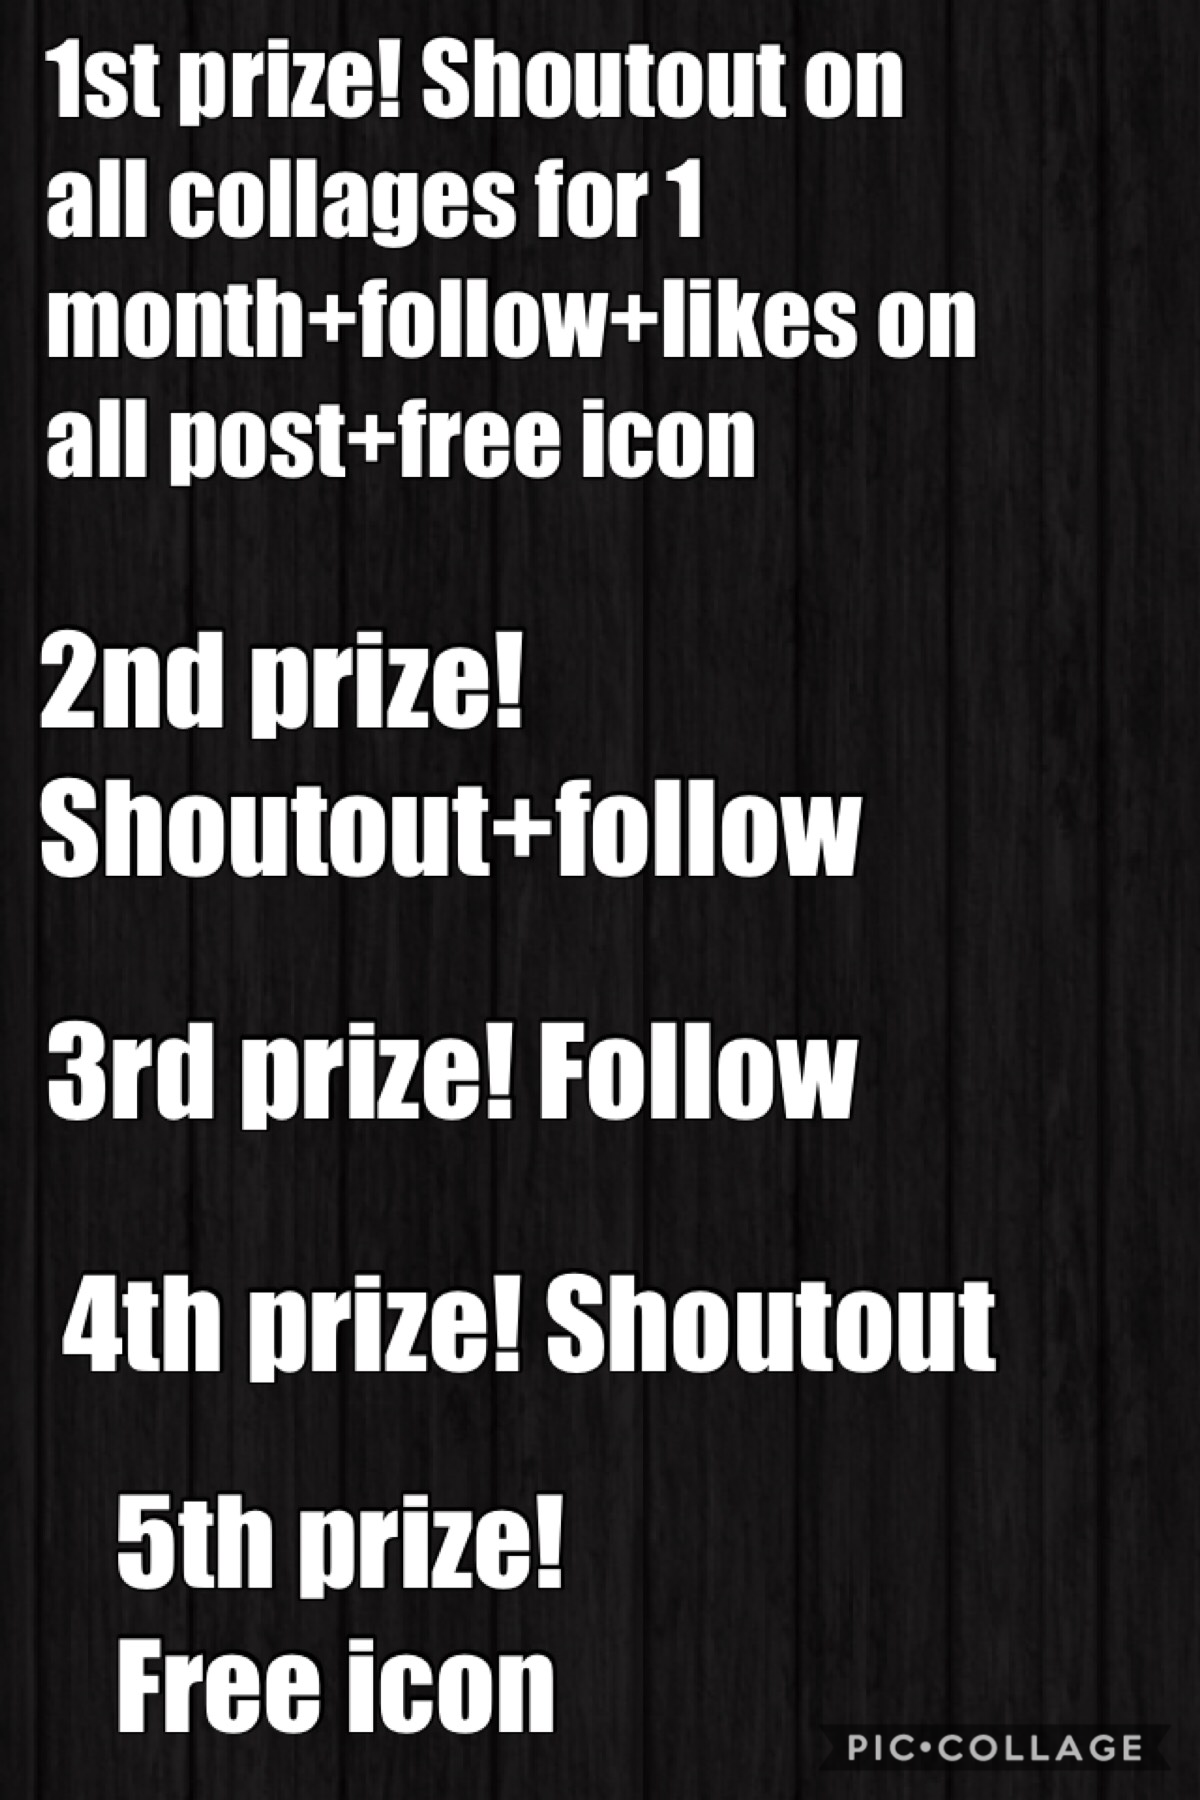 Prizes for contest!
5 to be won remember it must be a marble design collage!